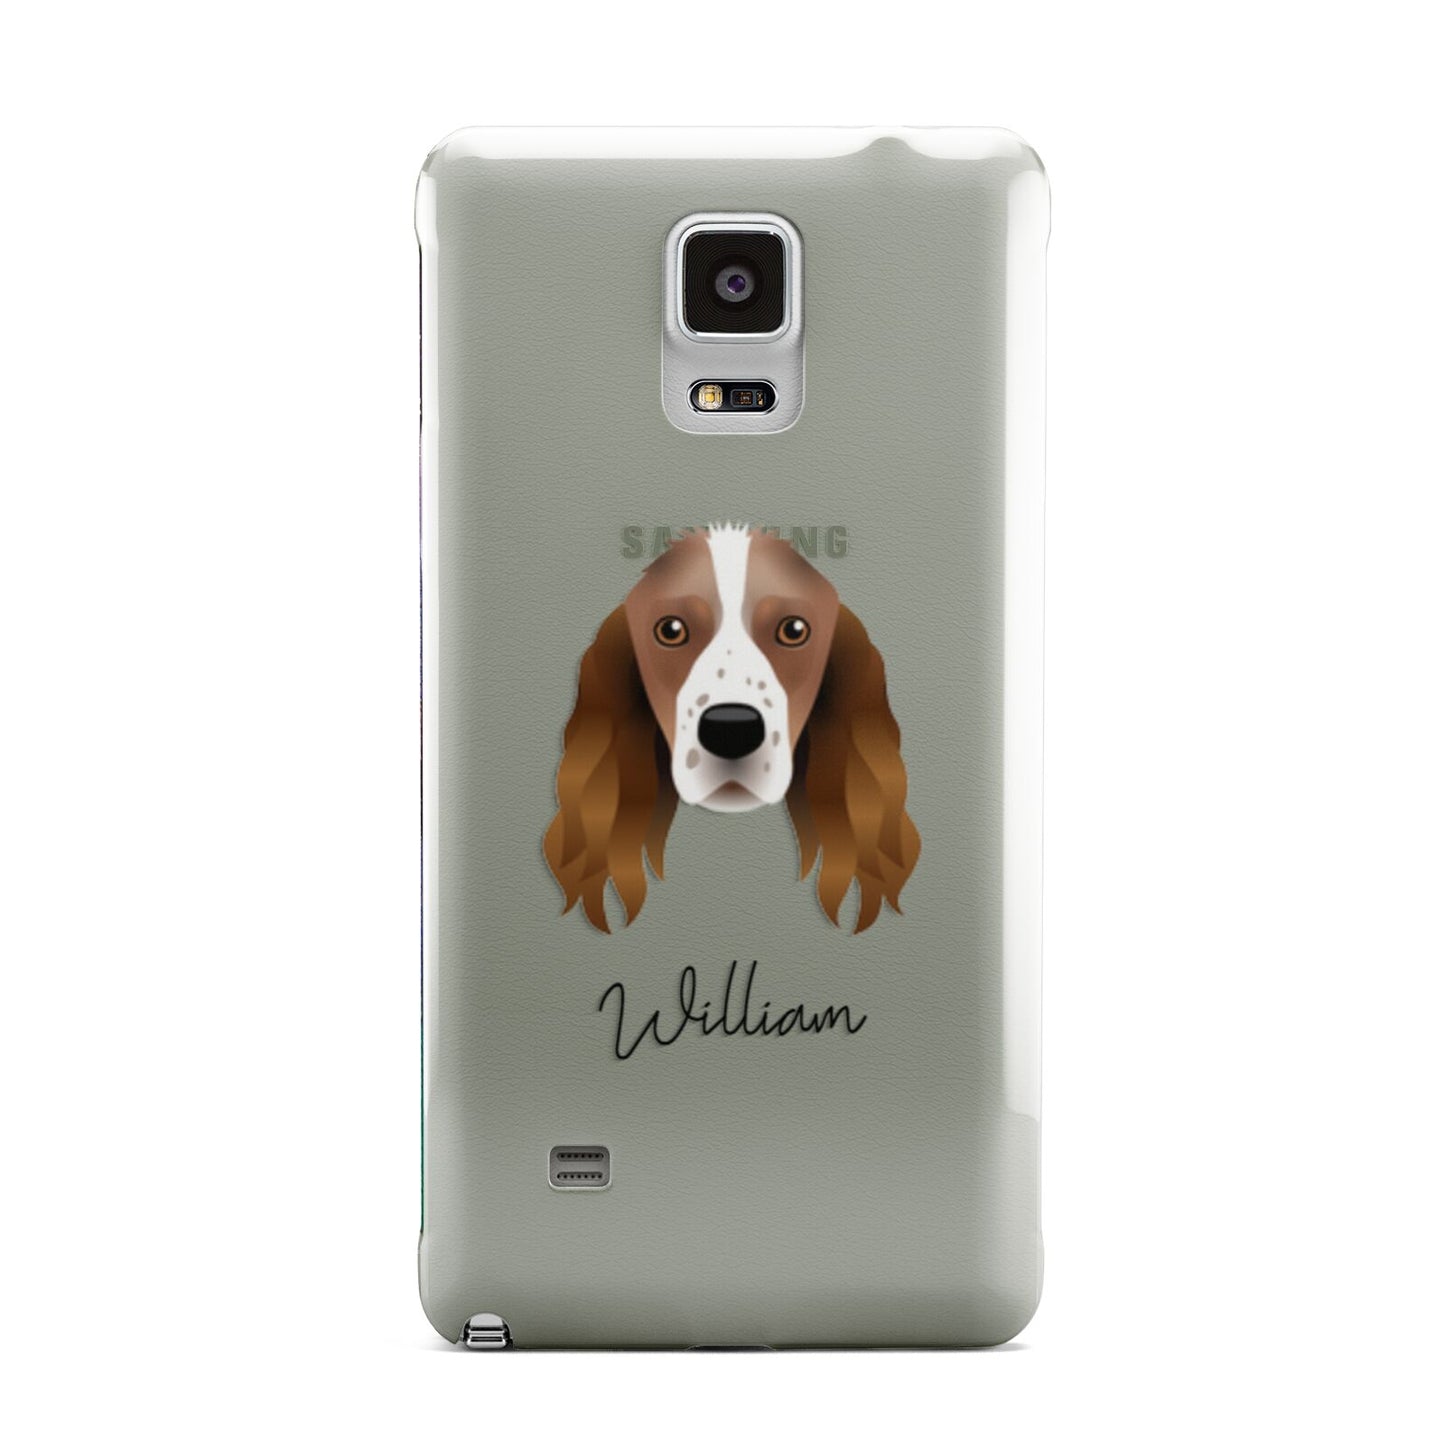 Springer Spaniel Personalised Samsung Galaxy Note 4 Case